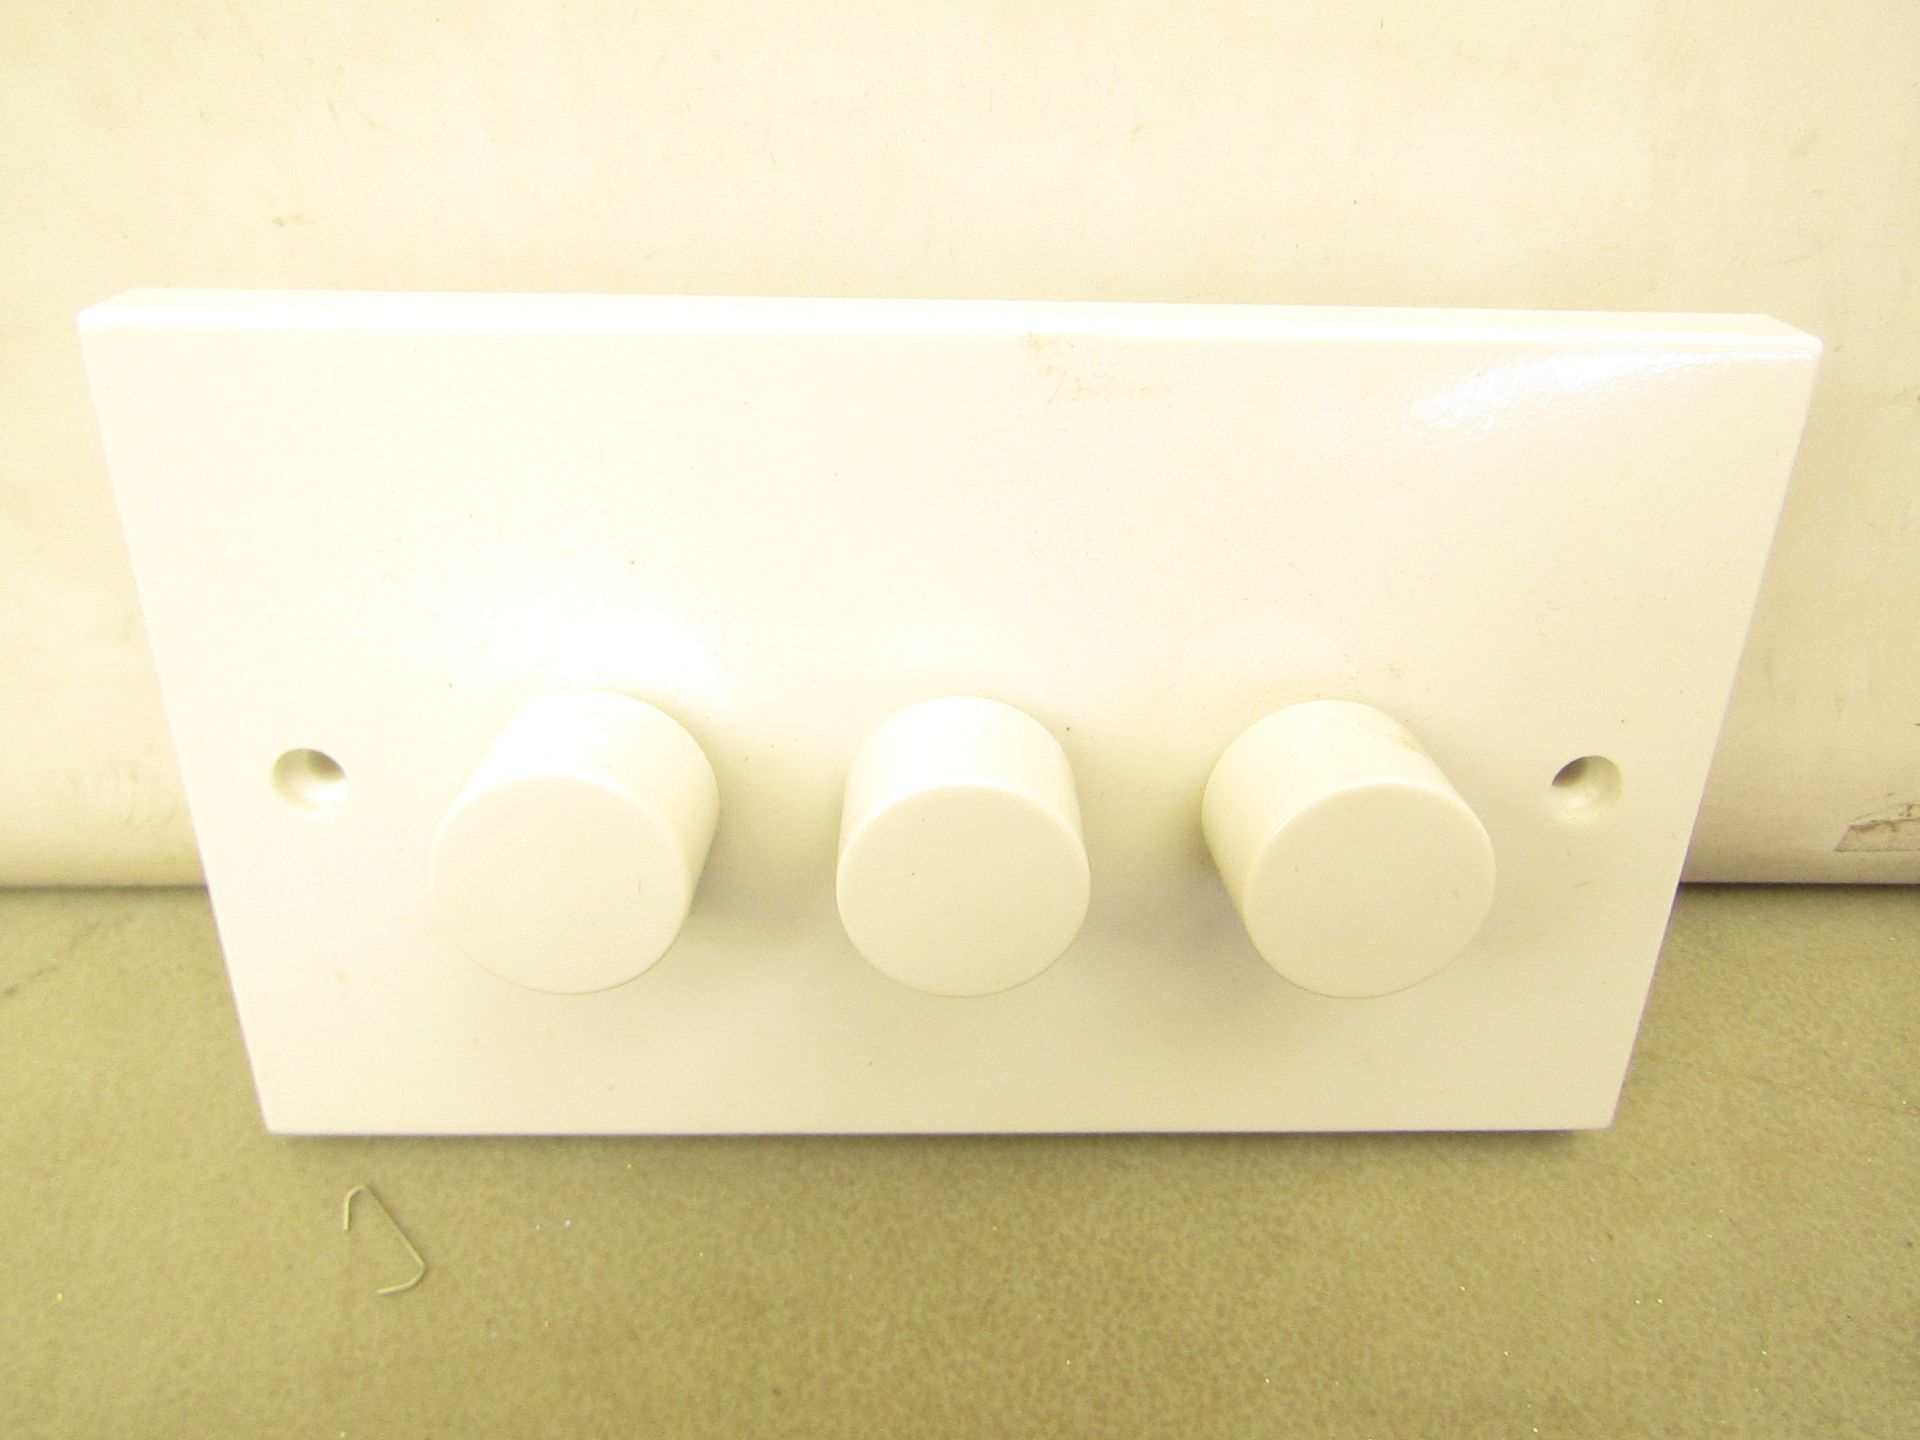 5x 3 Gang dimmer switches, new and packaged.